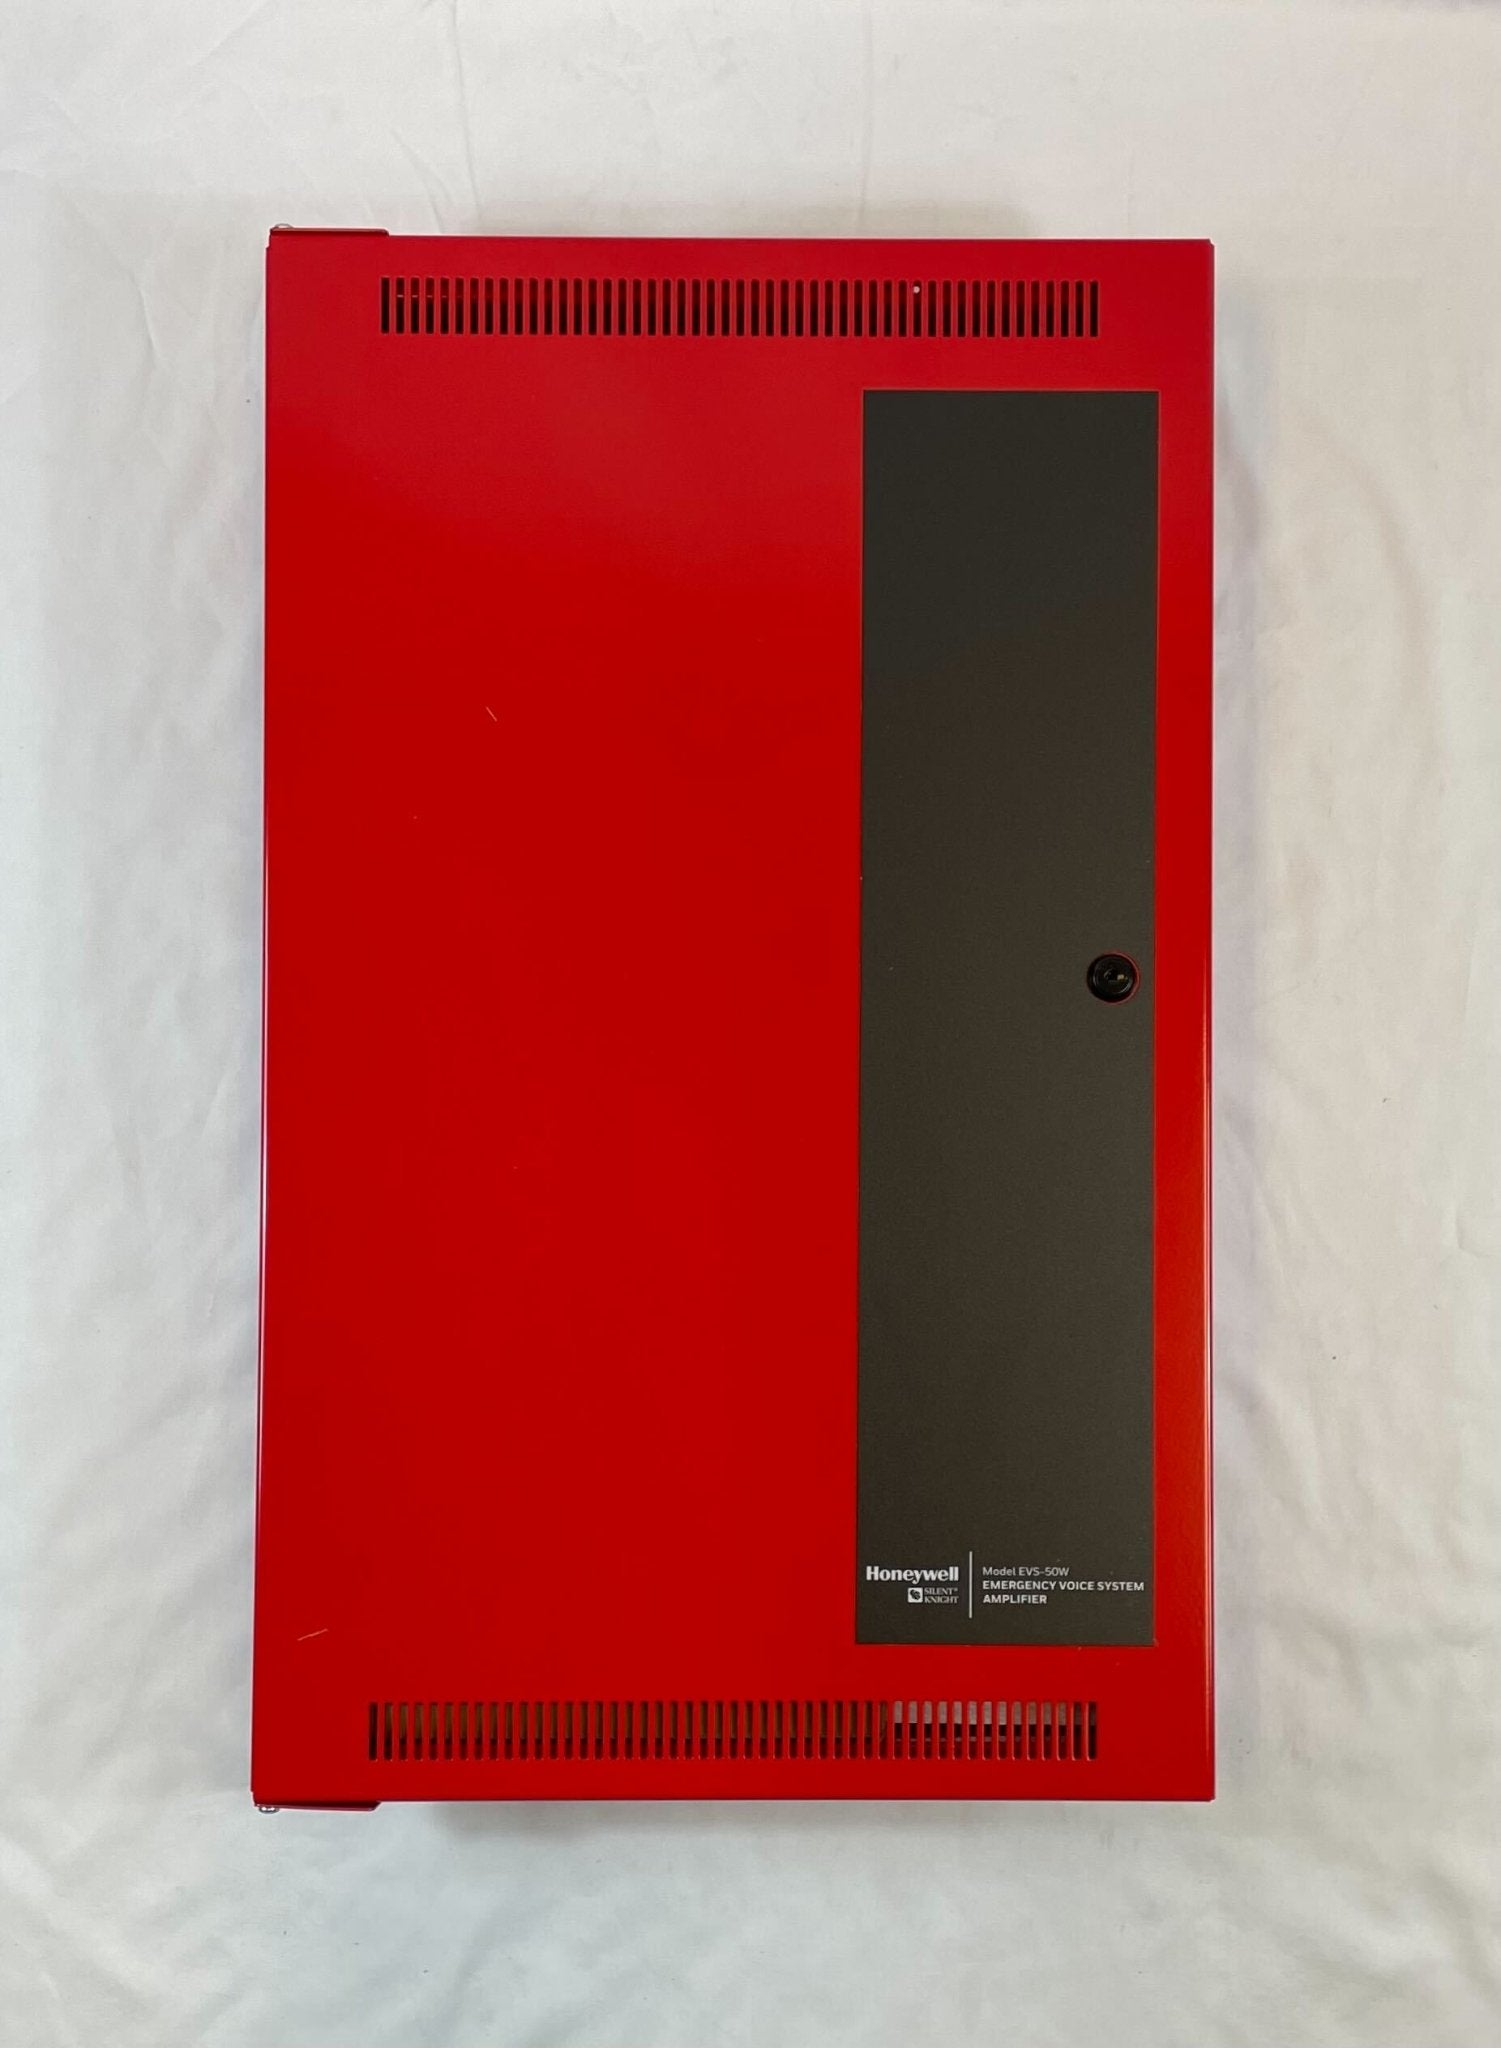 Silent Knight EVS-50W - The Fire Alarm Supplier